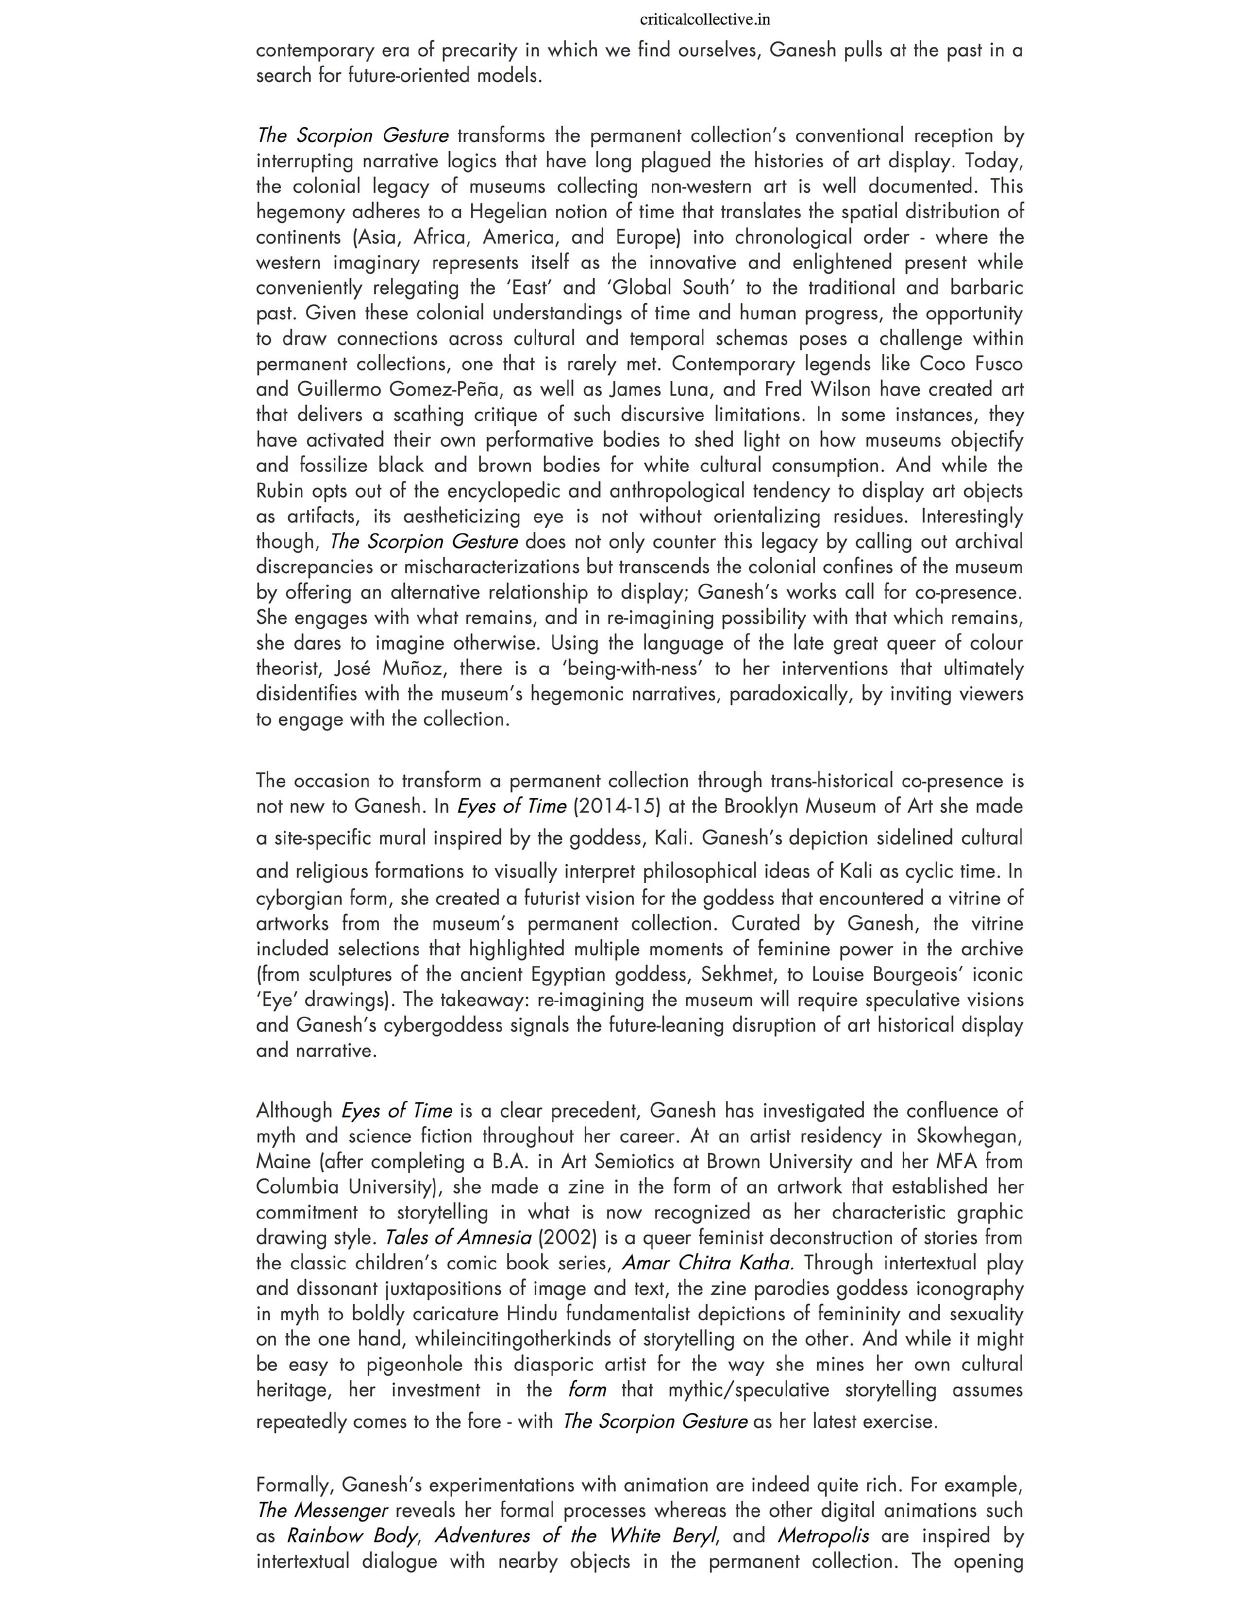 Natasha Bissonauth critical collective scholarly review-min_Page_2.jpg